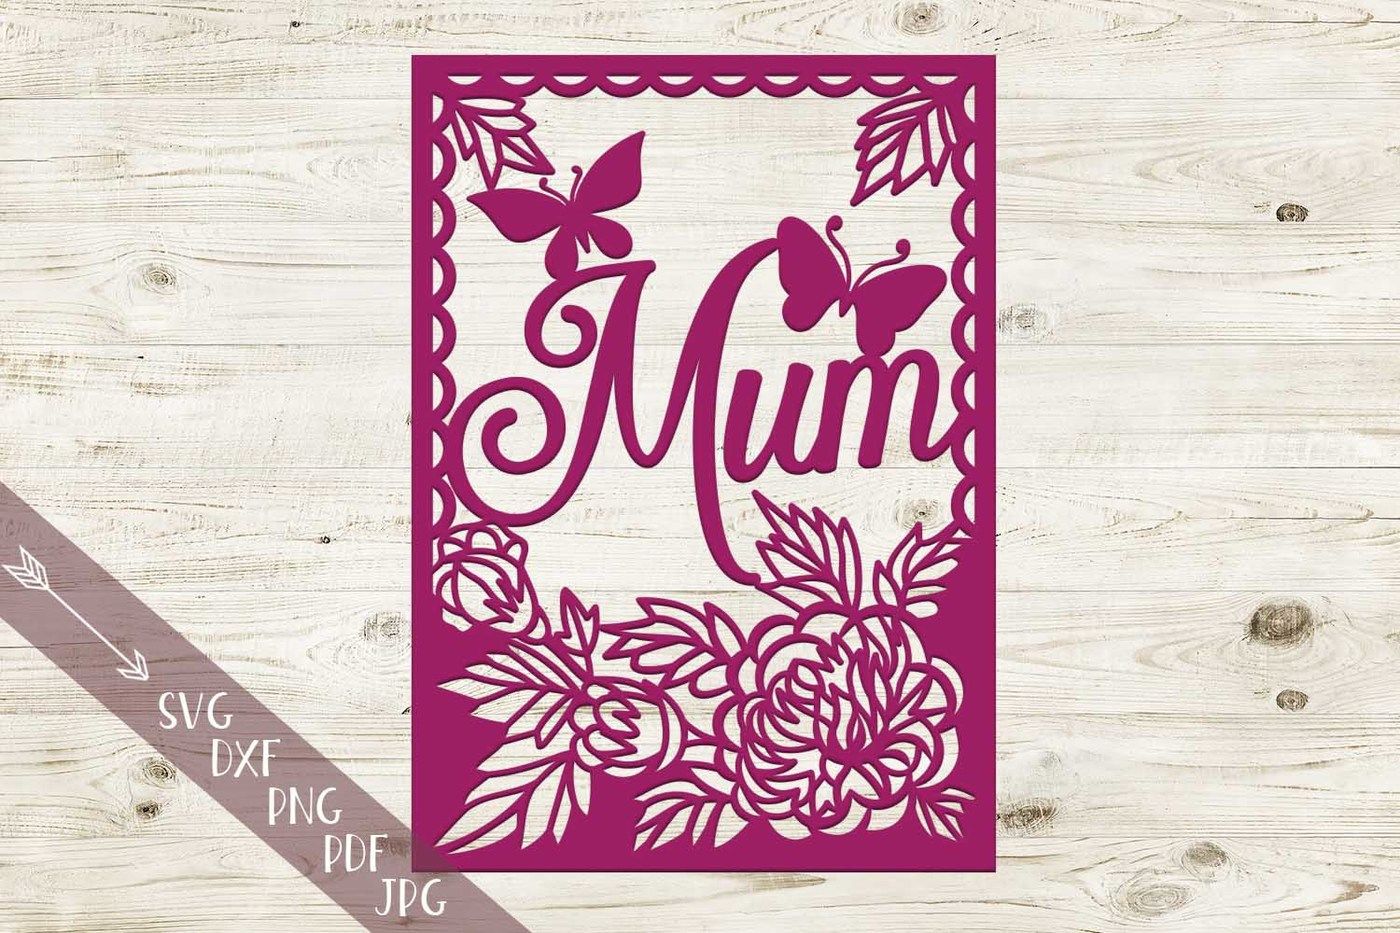 Download Visual Arts Craft Supplies Tools Jpeg Mother S Day Template 4 X Mother And Twins Heart Paper Cutting Template Baby New Baby Template Svg Personal Use Vinyl Template